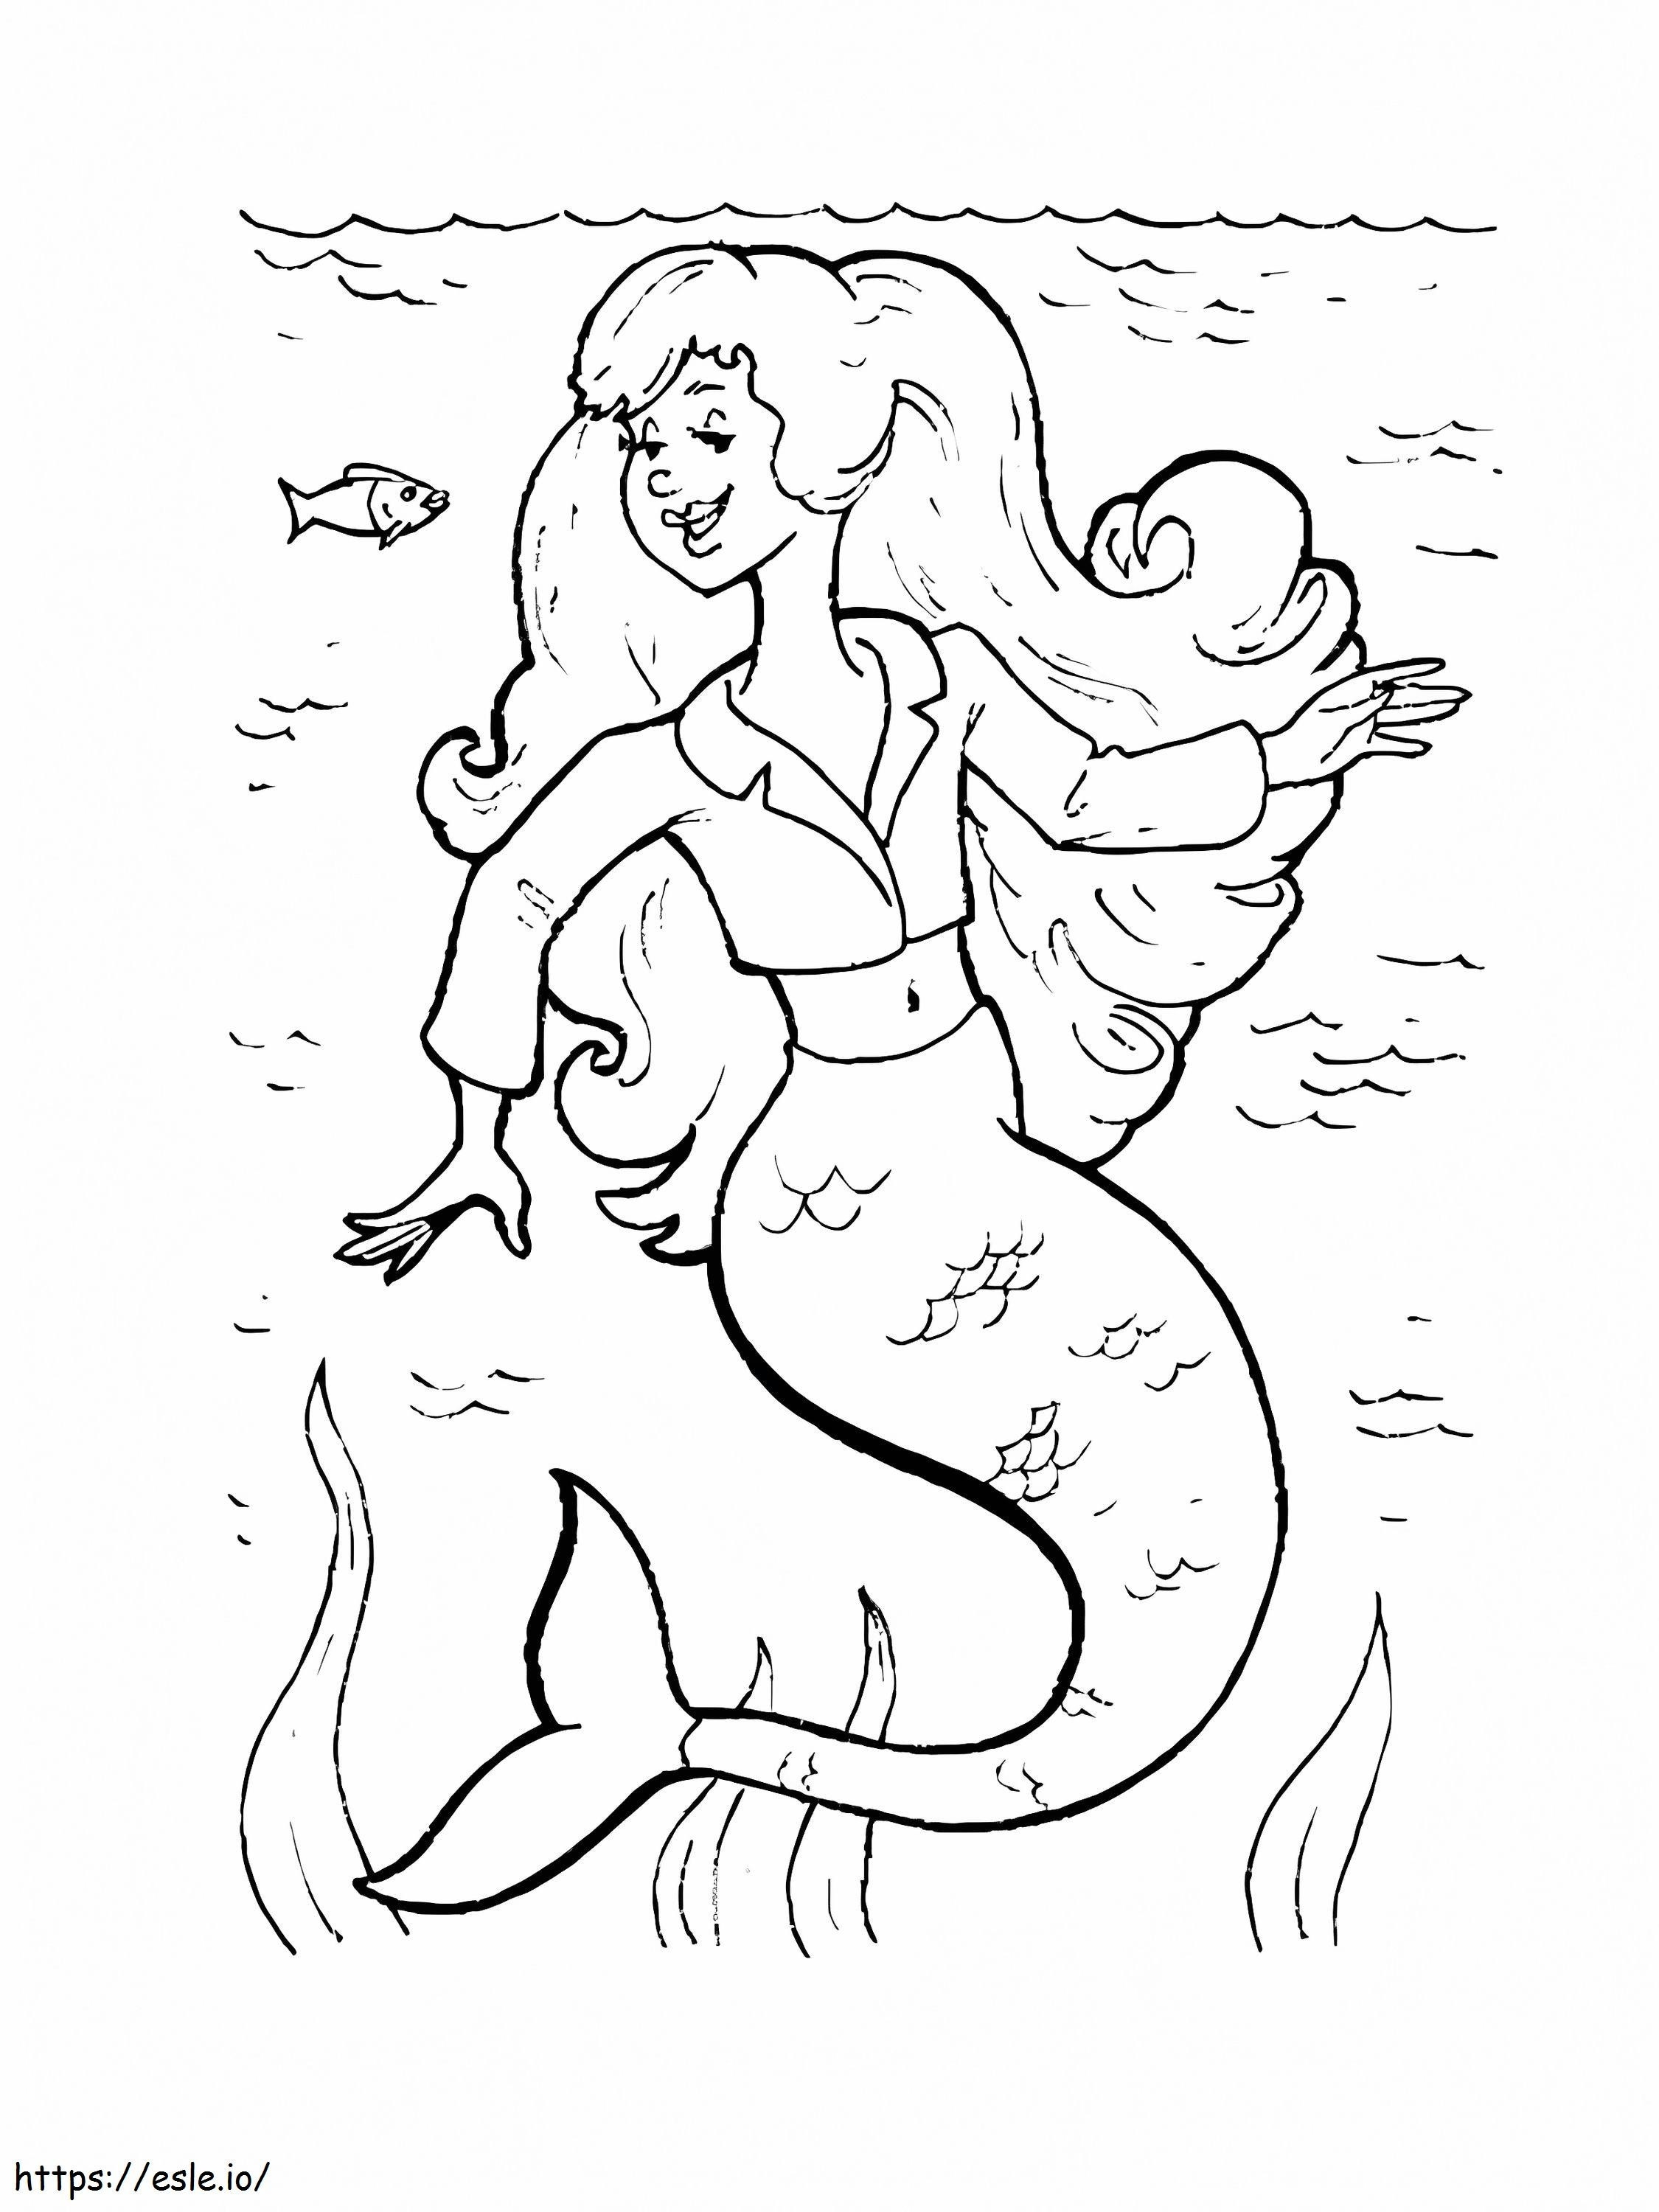 Mermaid For Girl coloring page